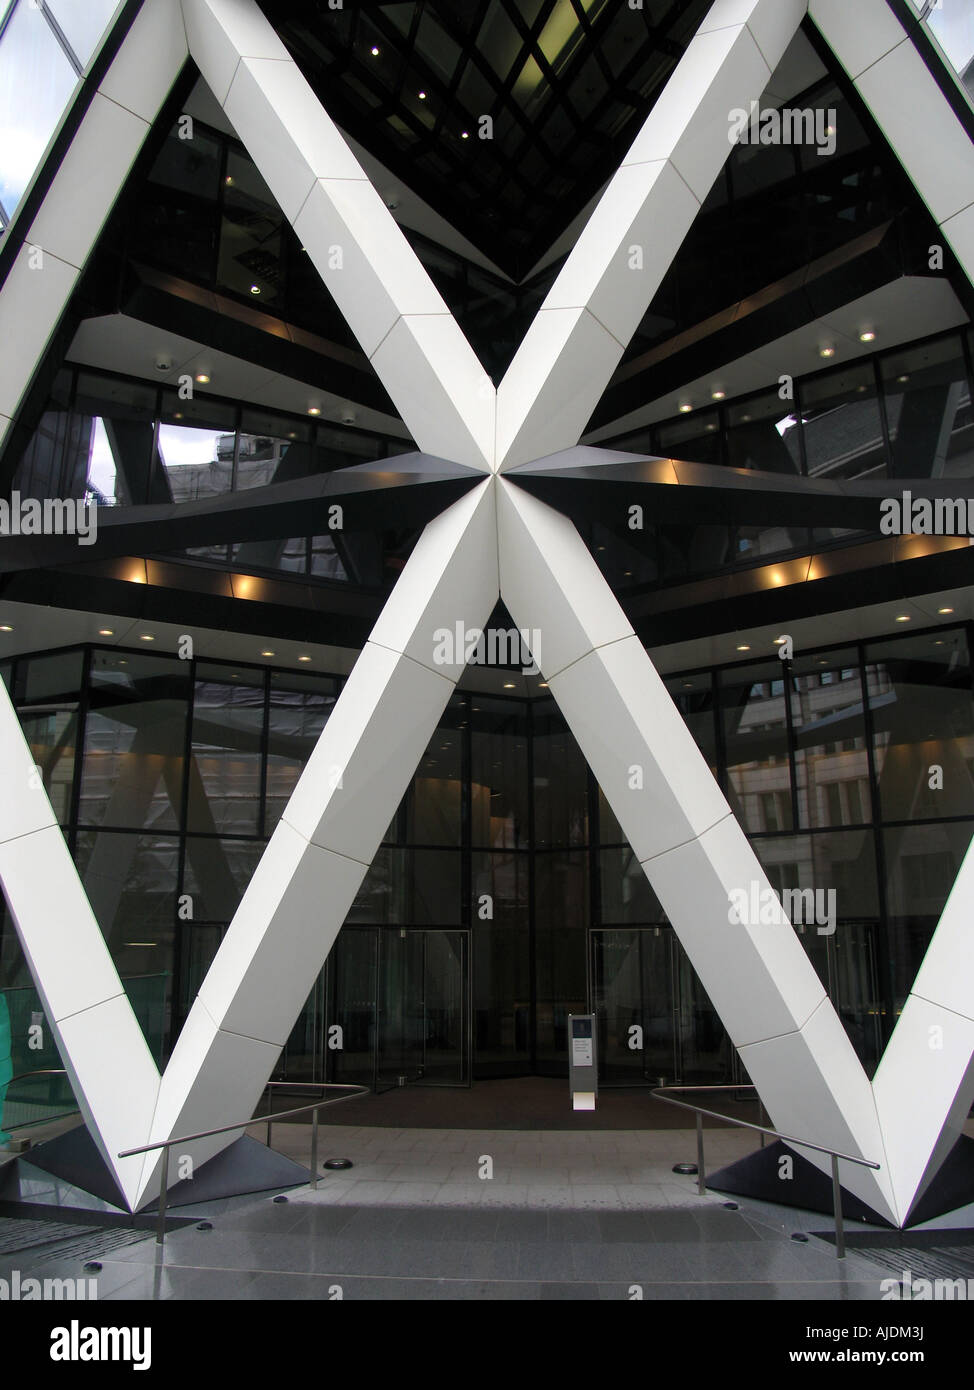 Entrance area to The Gherkin building London Stock Photo